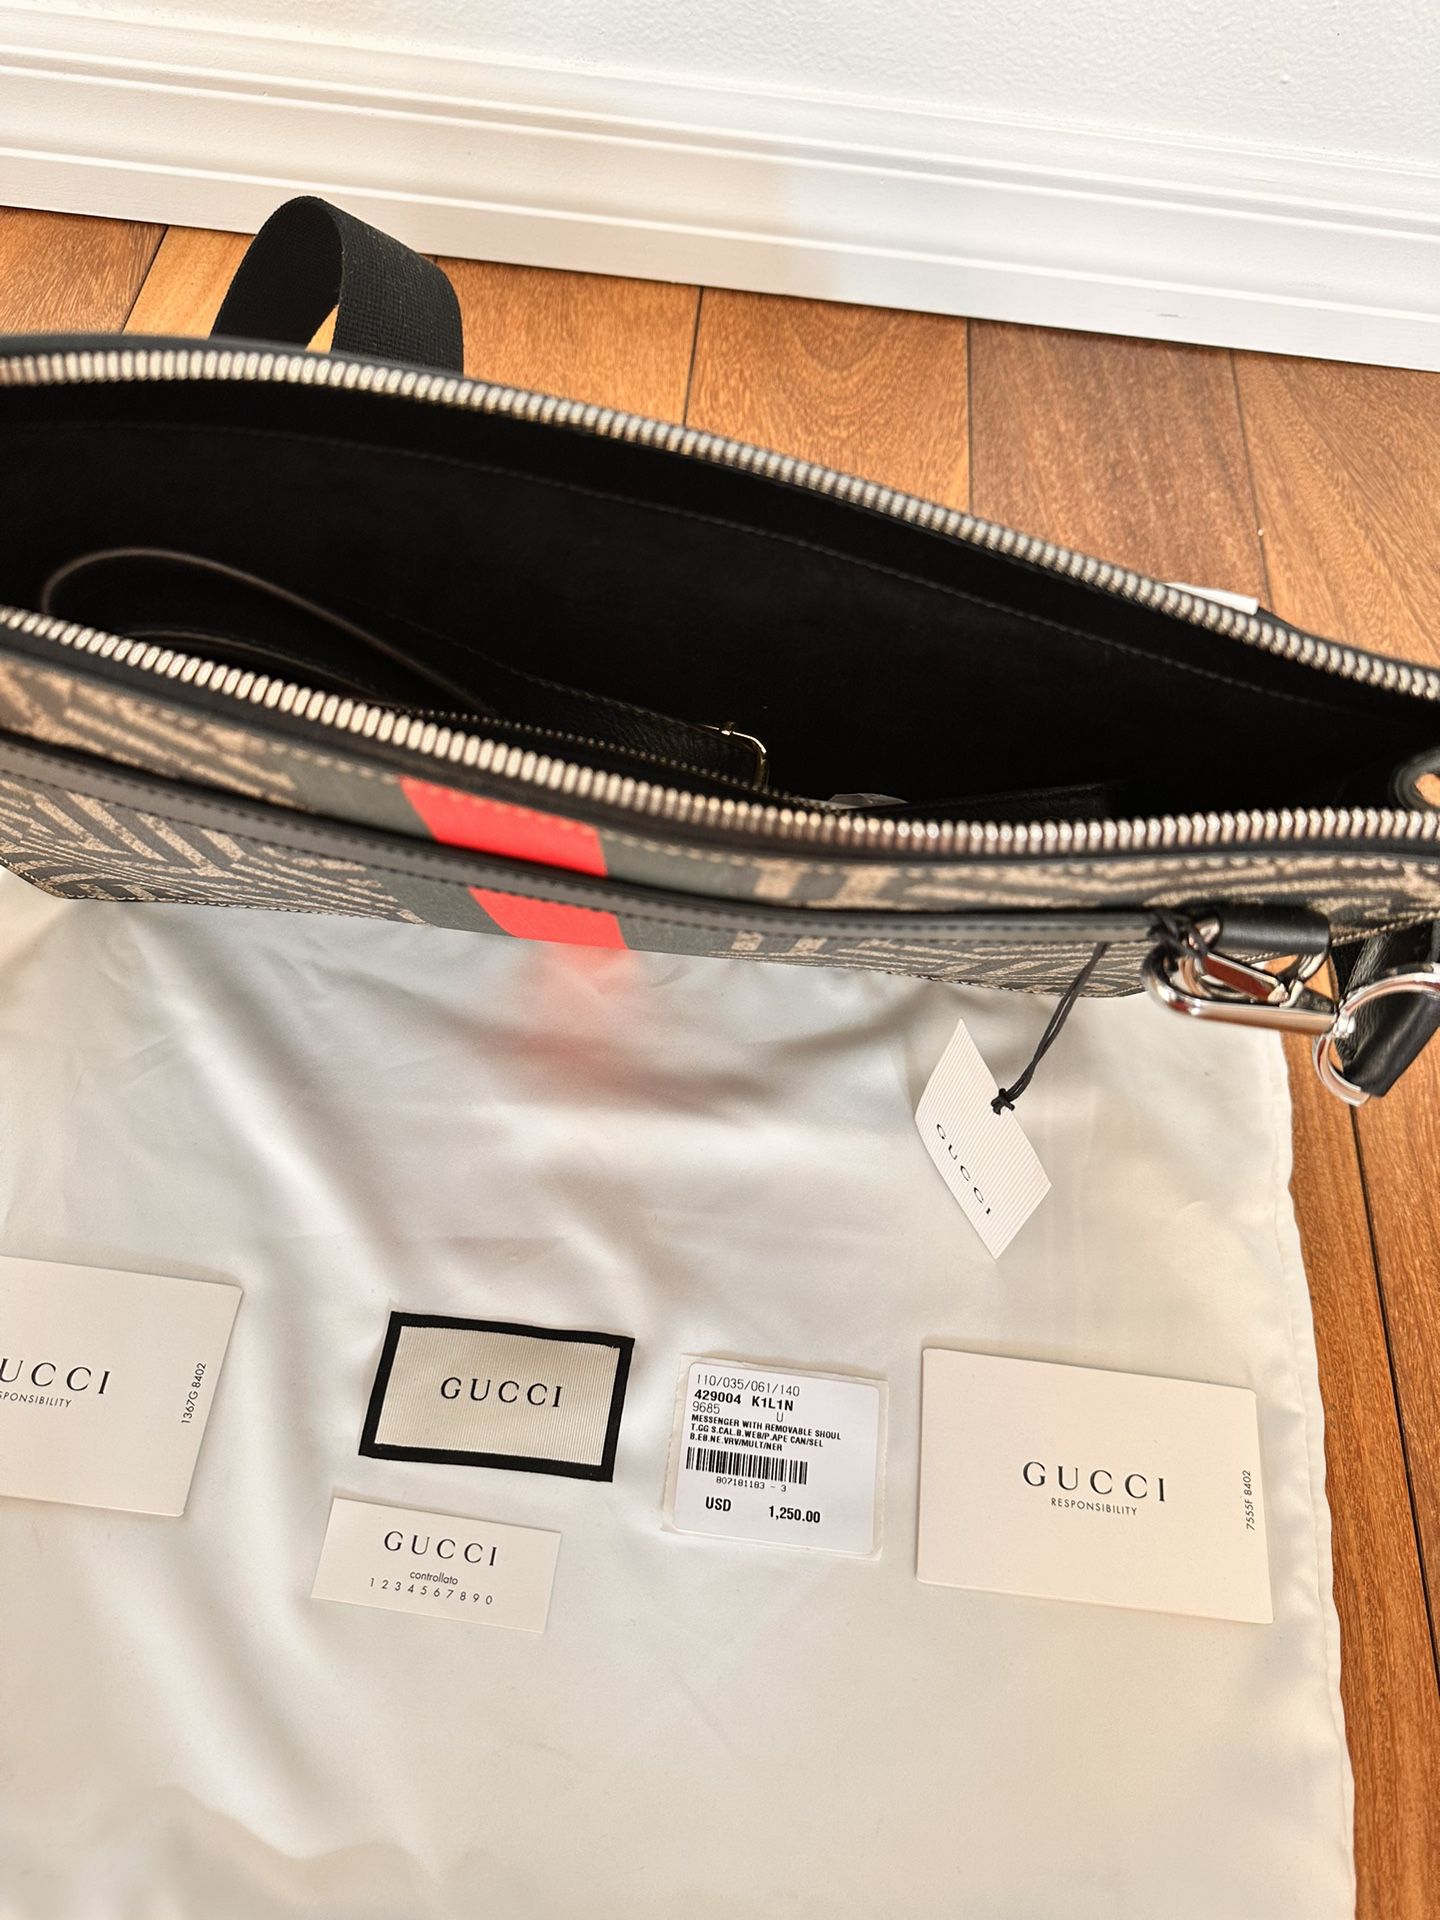  Gucci Bee Messenger Bag With Removable Shoulder Strap & Dust Bag Never Been Used/New With Tags. Stood In Dust Bag. 